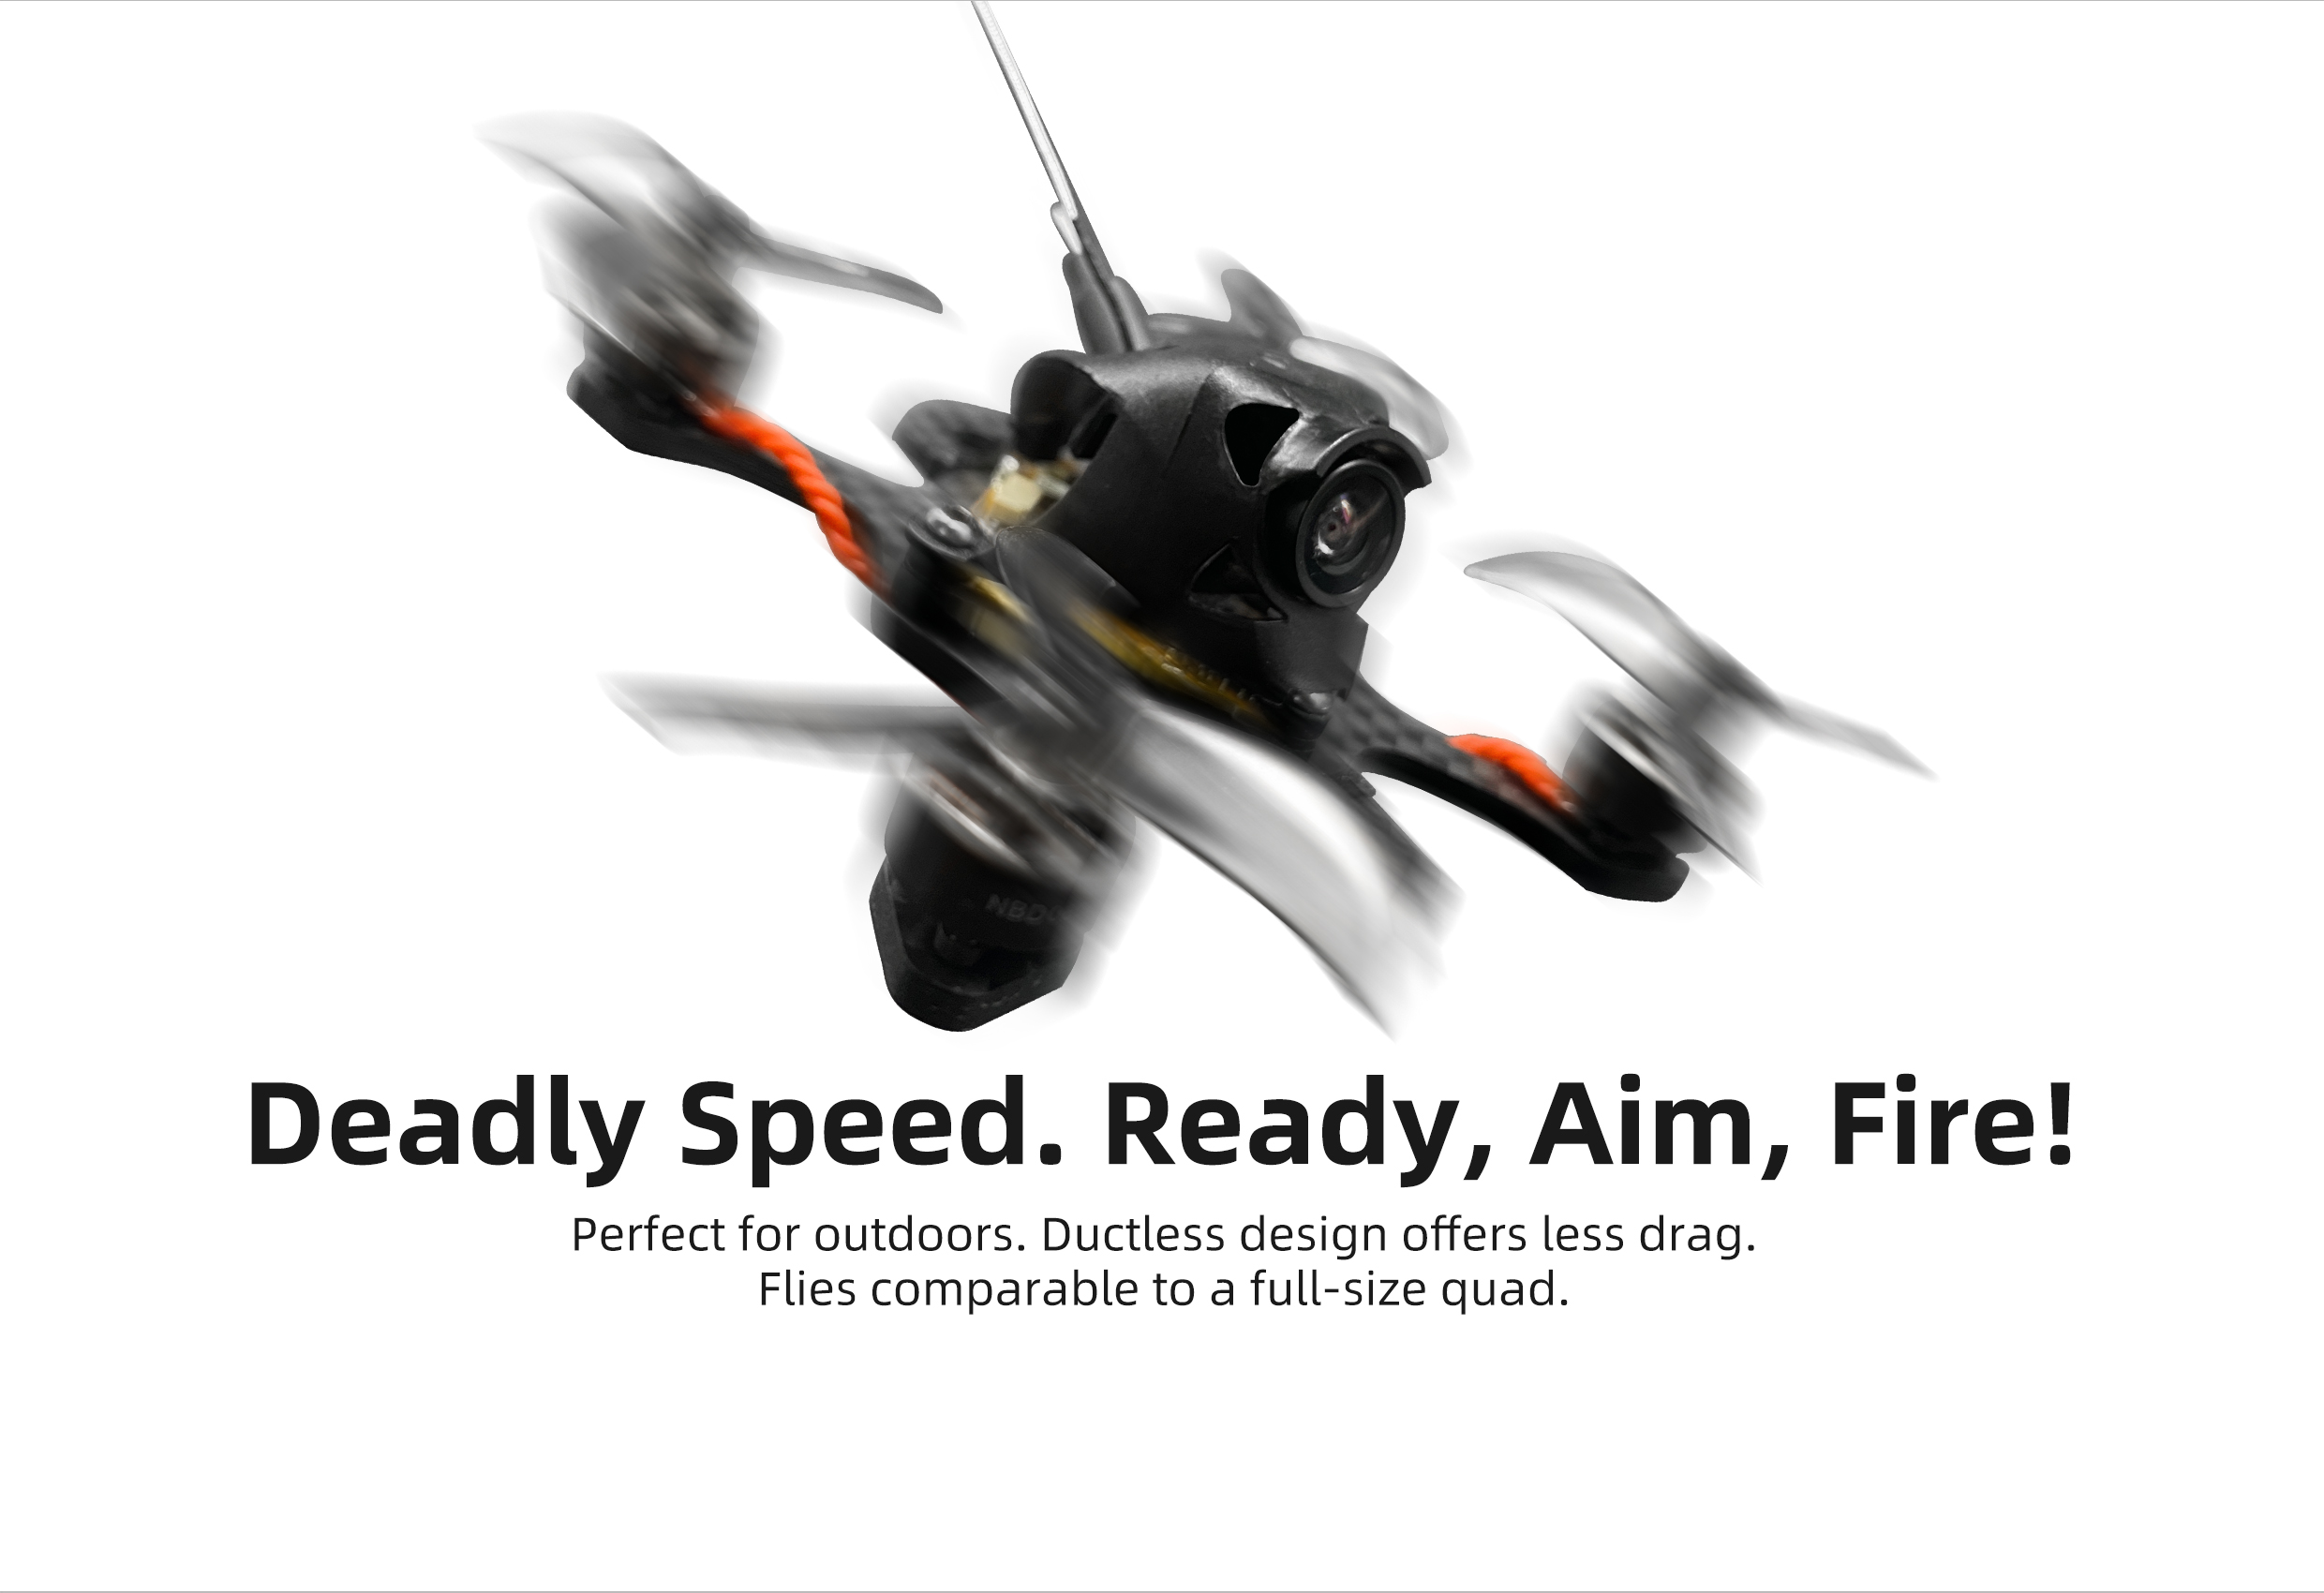 NewBeeDrone Mosquito BLV3 BNF Specifications and Features